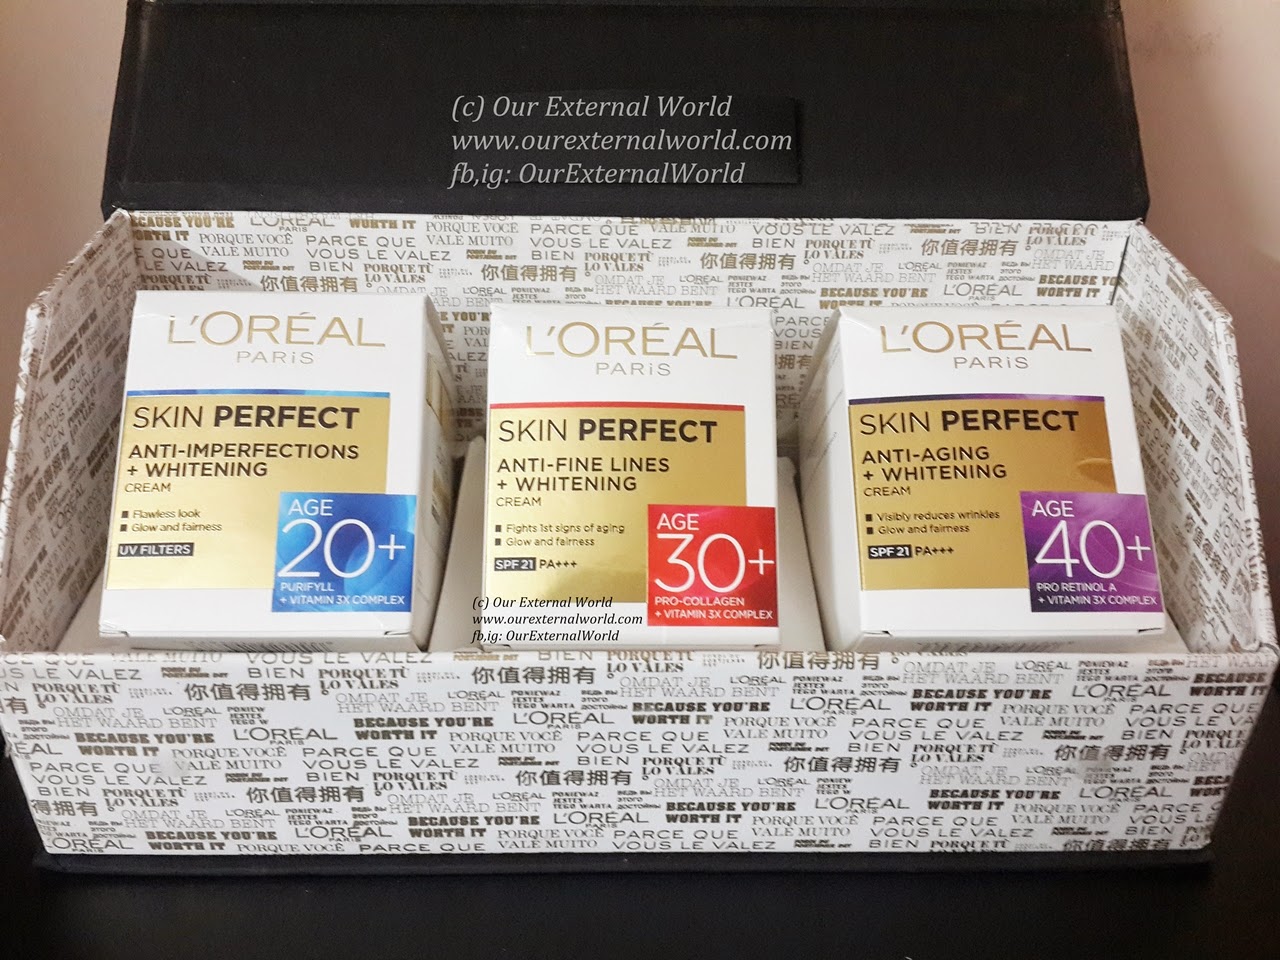 New Launch: L'Oreal Paris Skin Perfect - Expert Skincare For Every Age, age20+, age30+, age40+, anti-aging, glowing skin, anti-marks